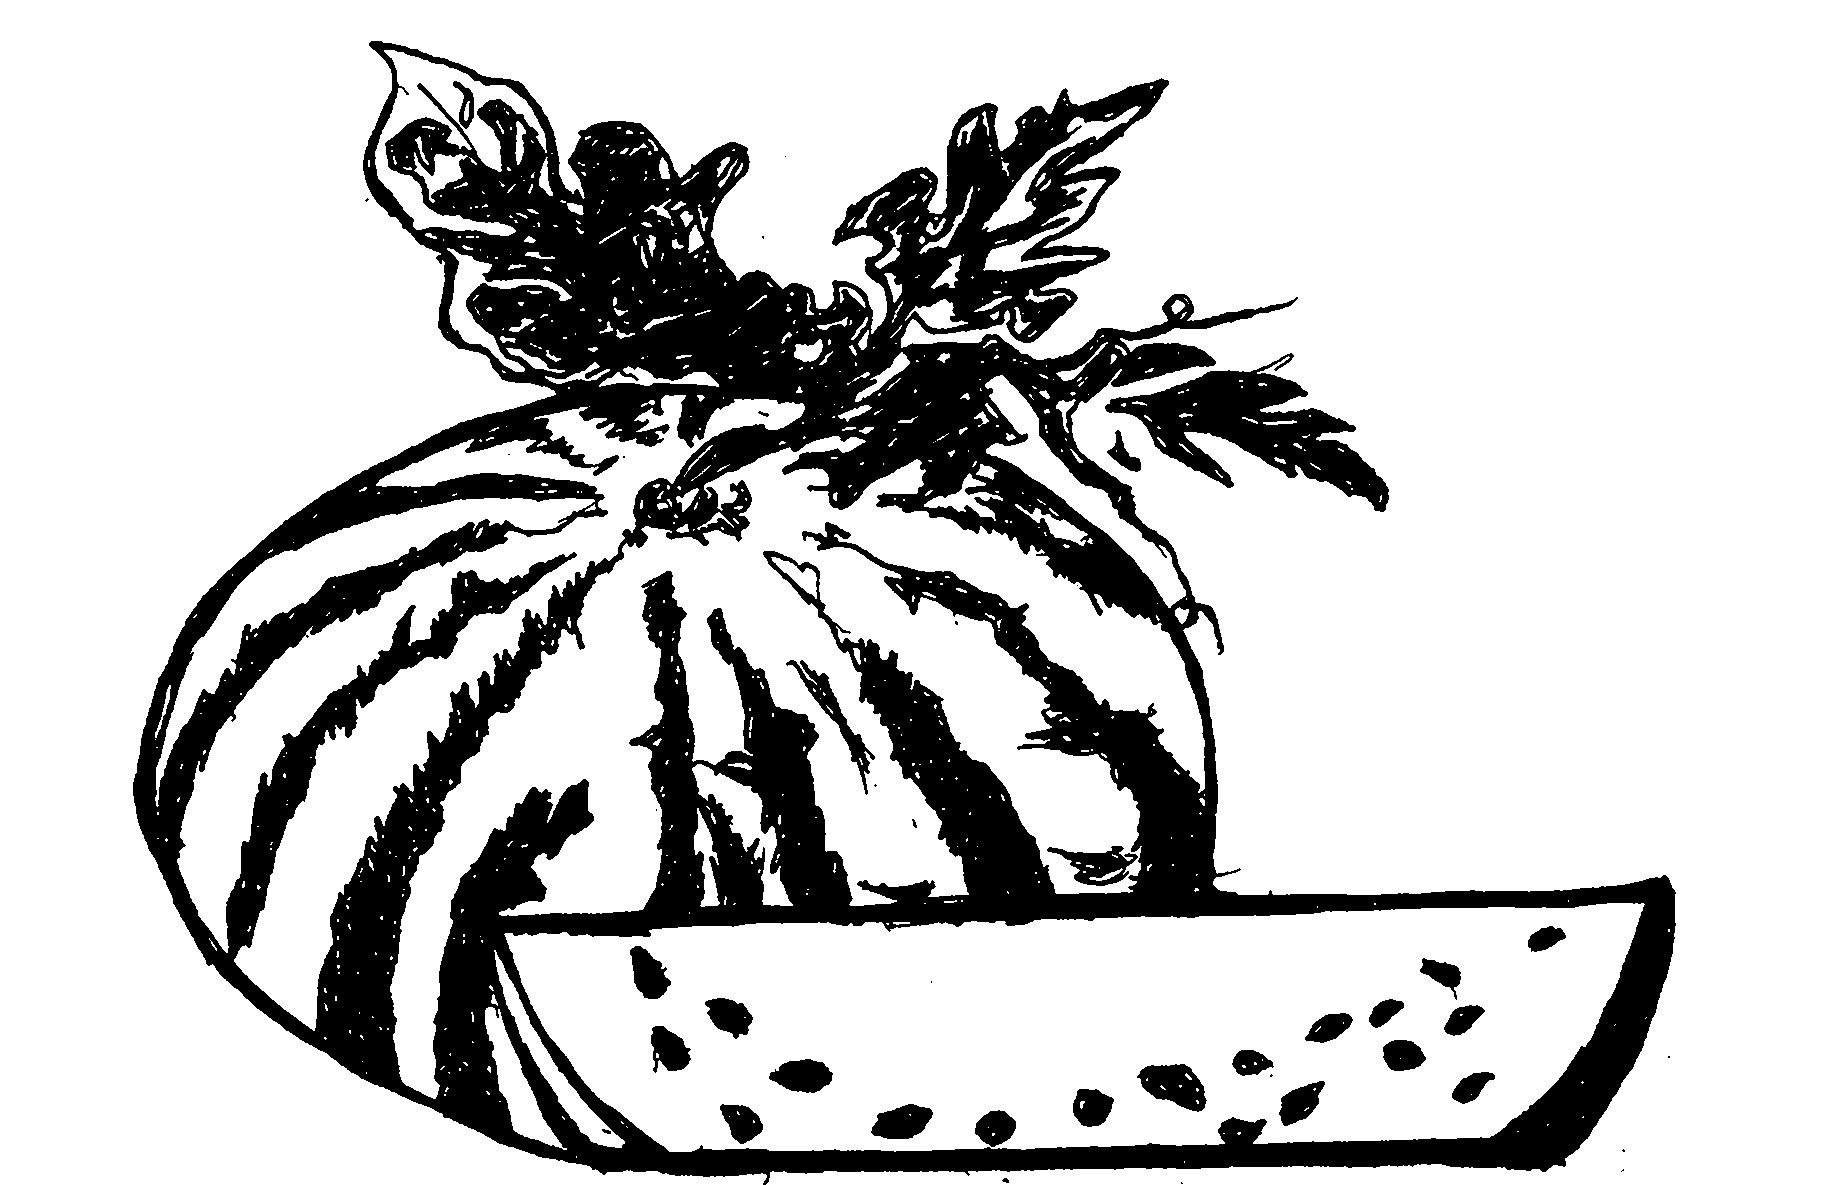 Technology and method for cultivating organic water melons